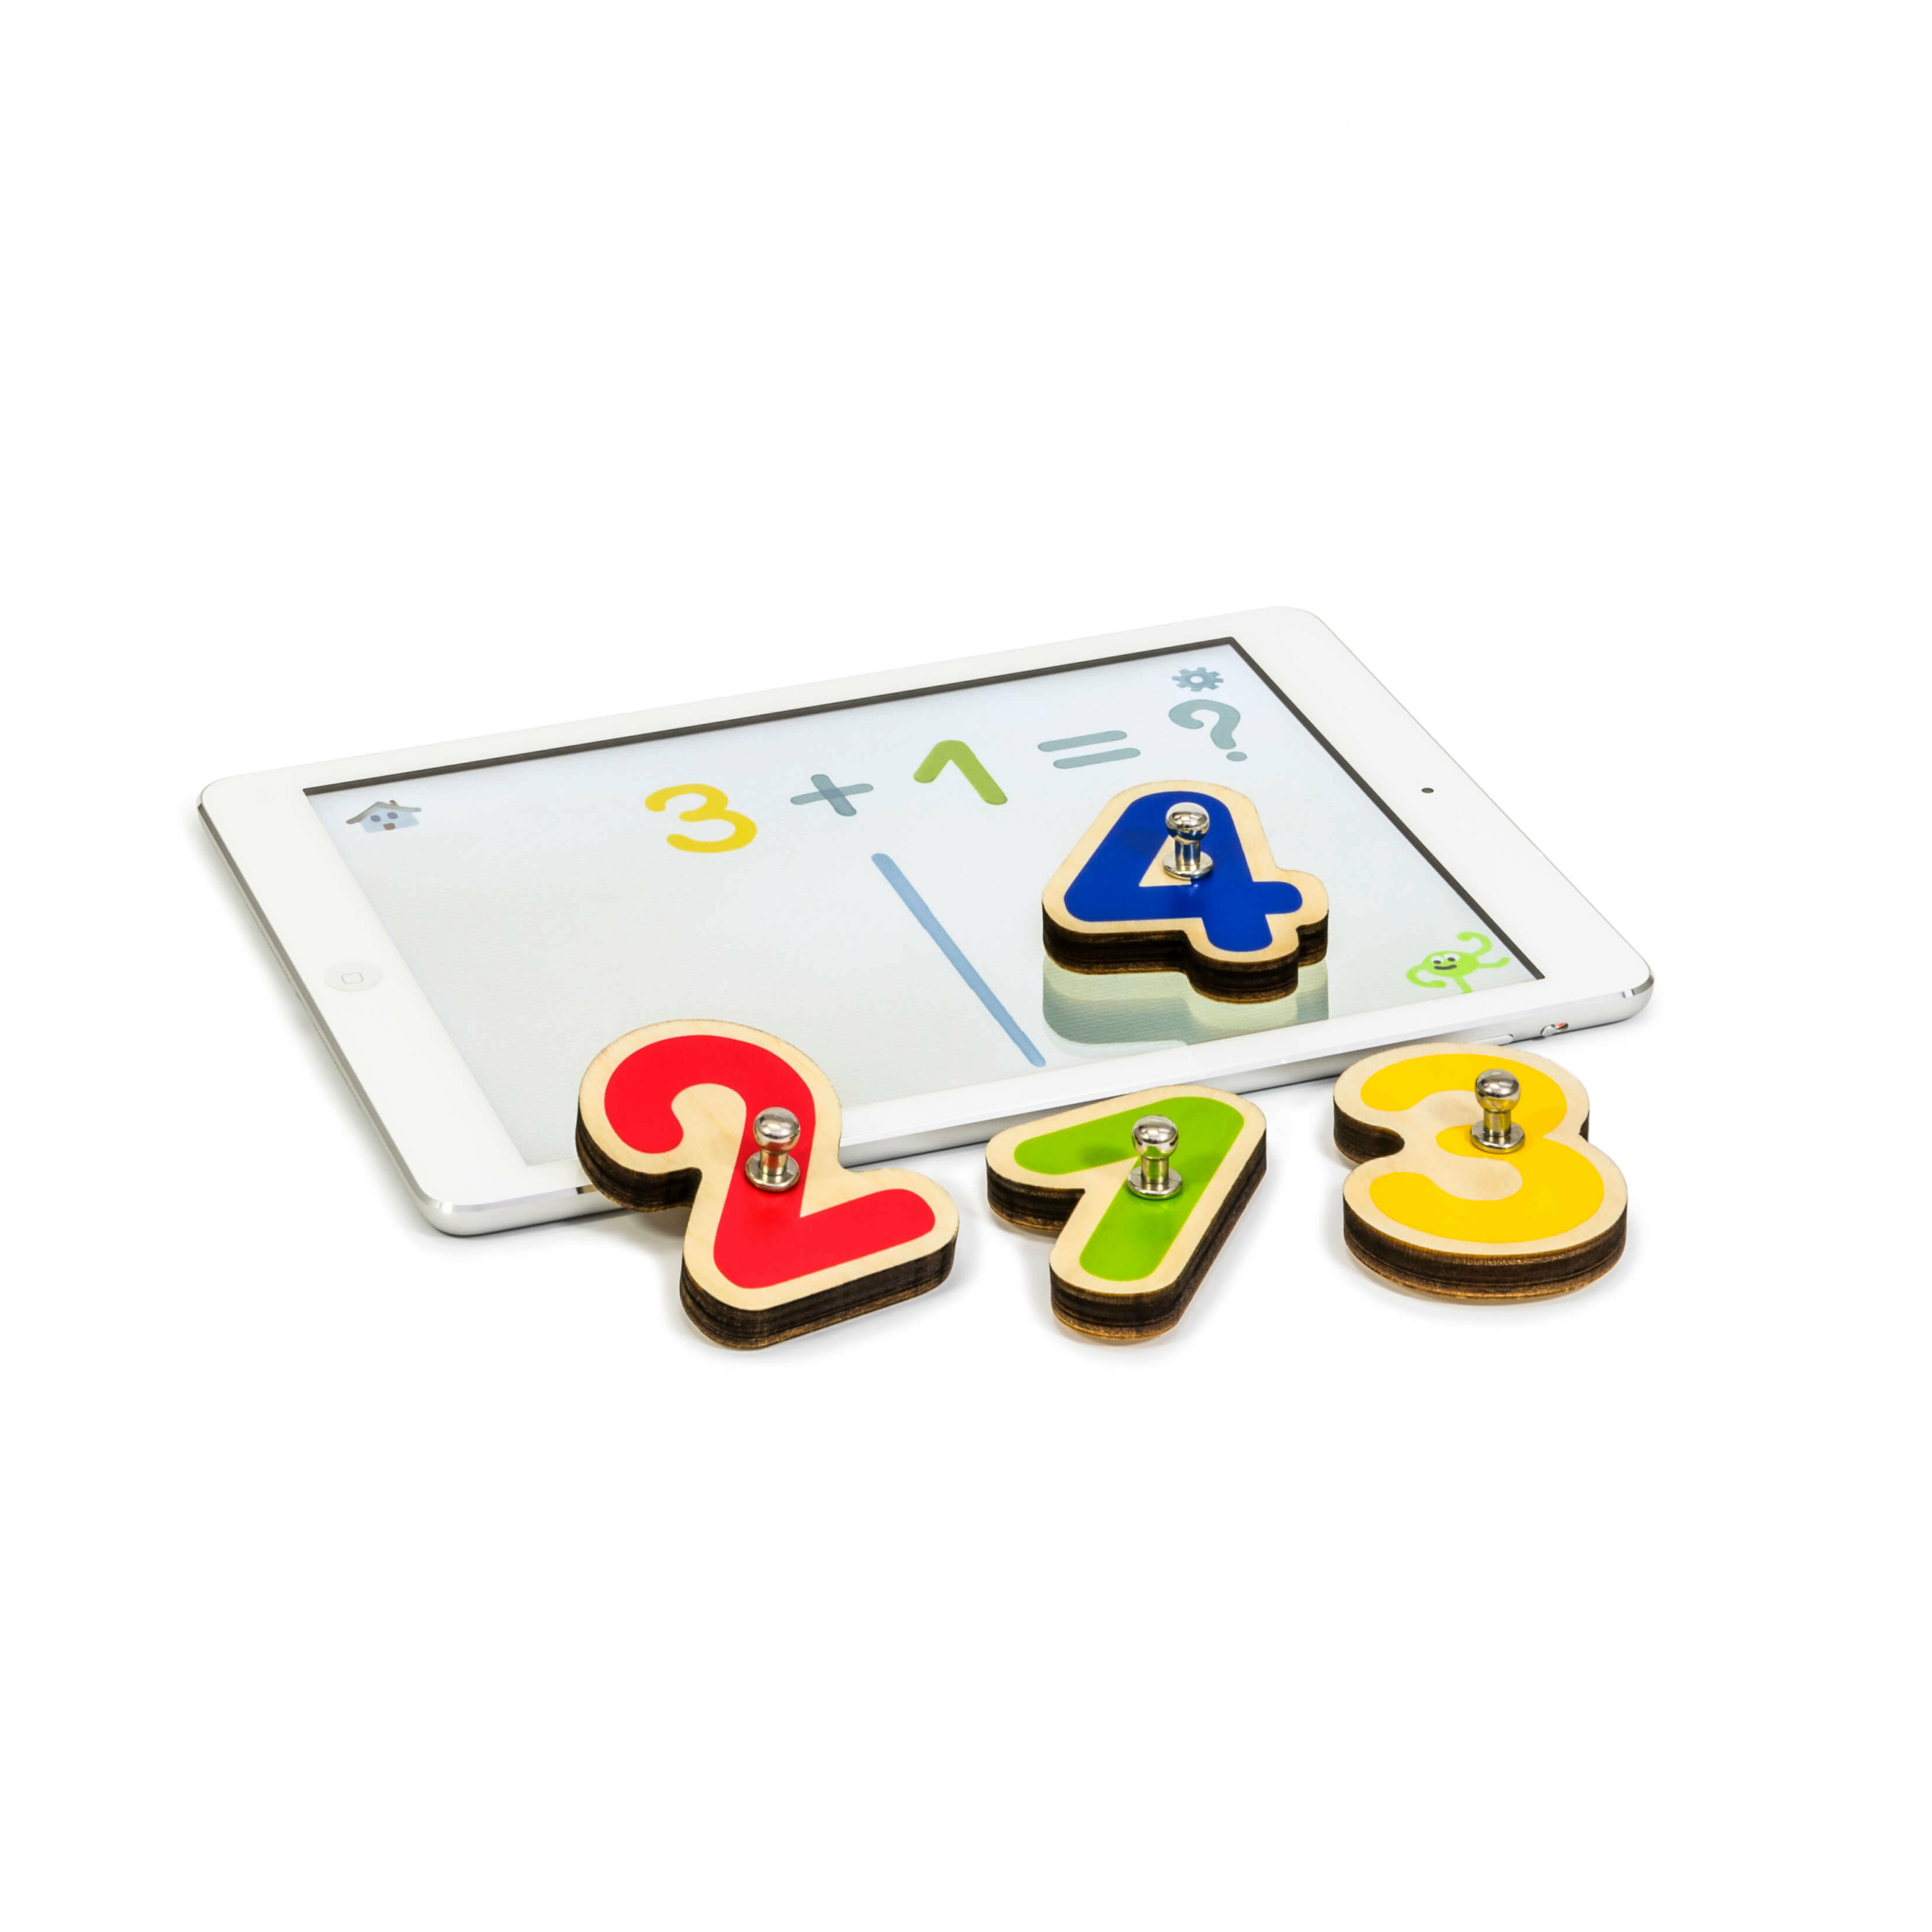 Kids/Children Educational Toy for Apple iPad Marbotic Smart Wooden Letters 3y 